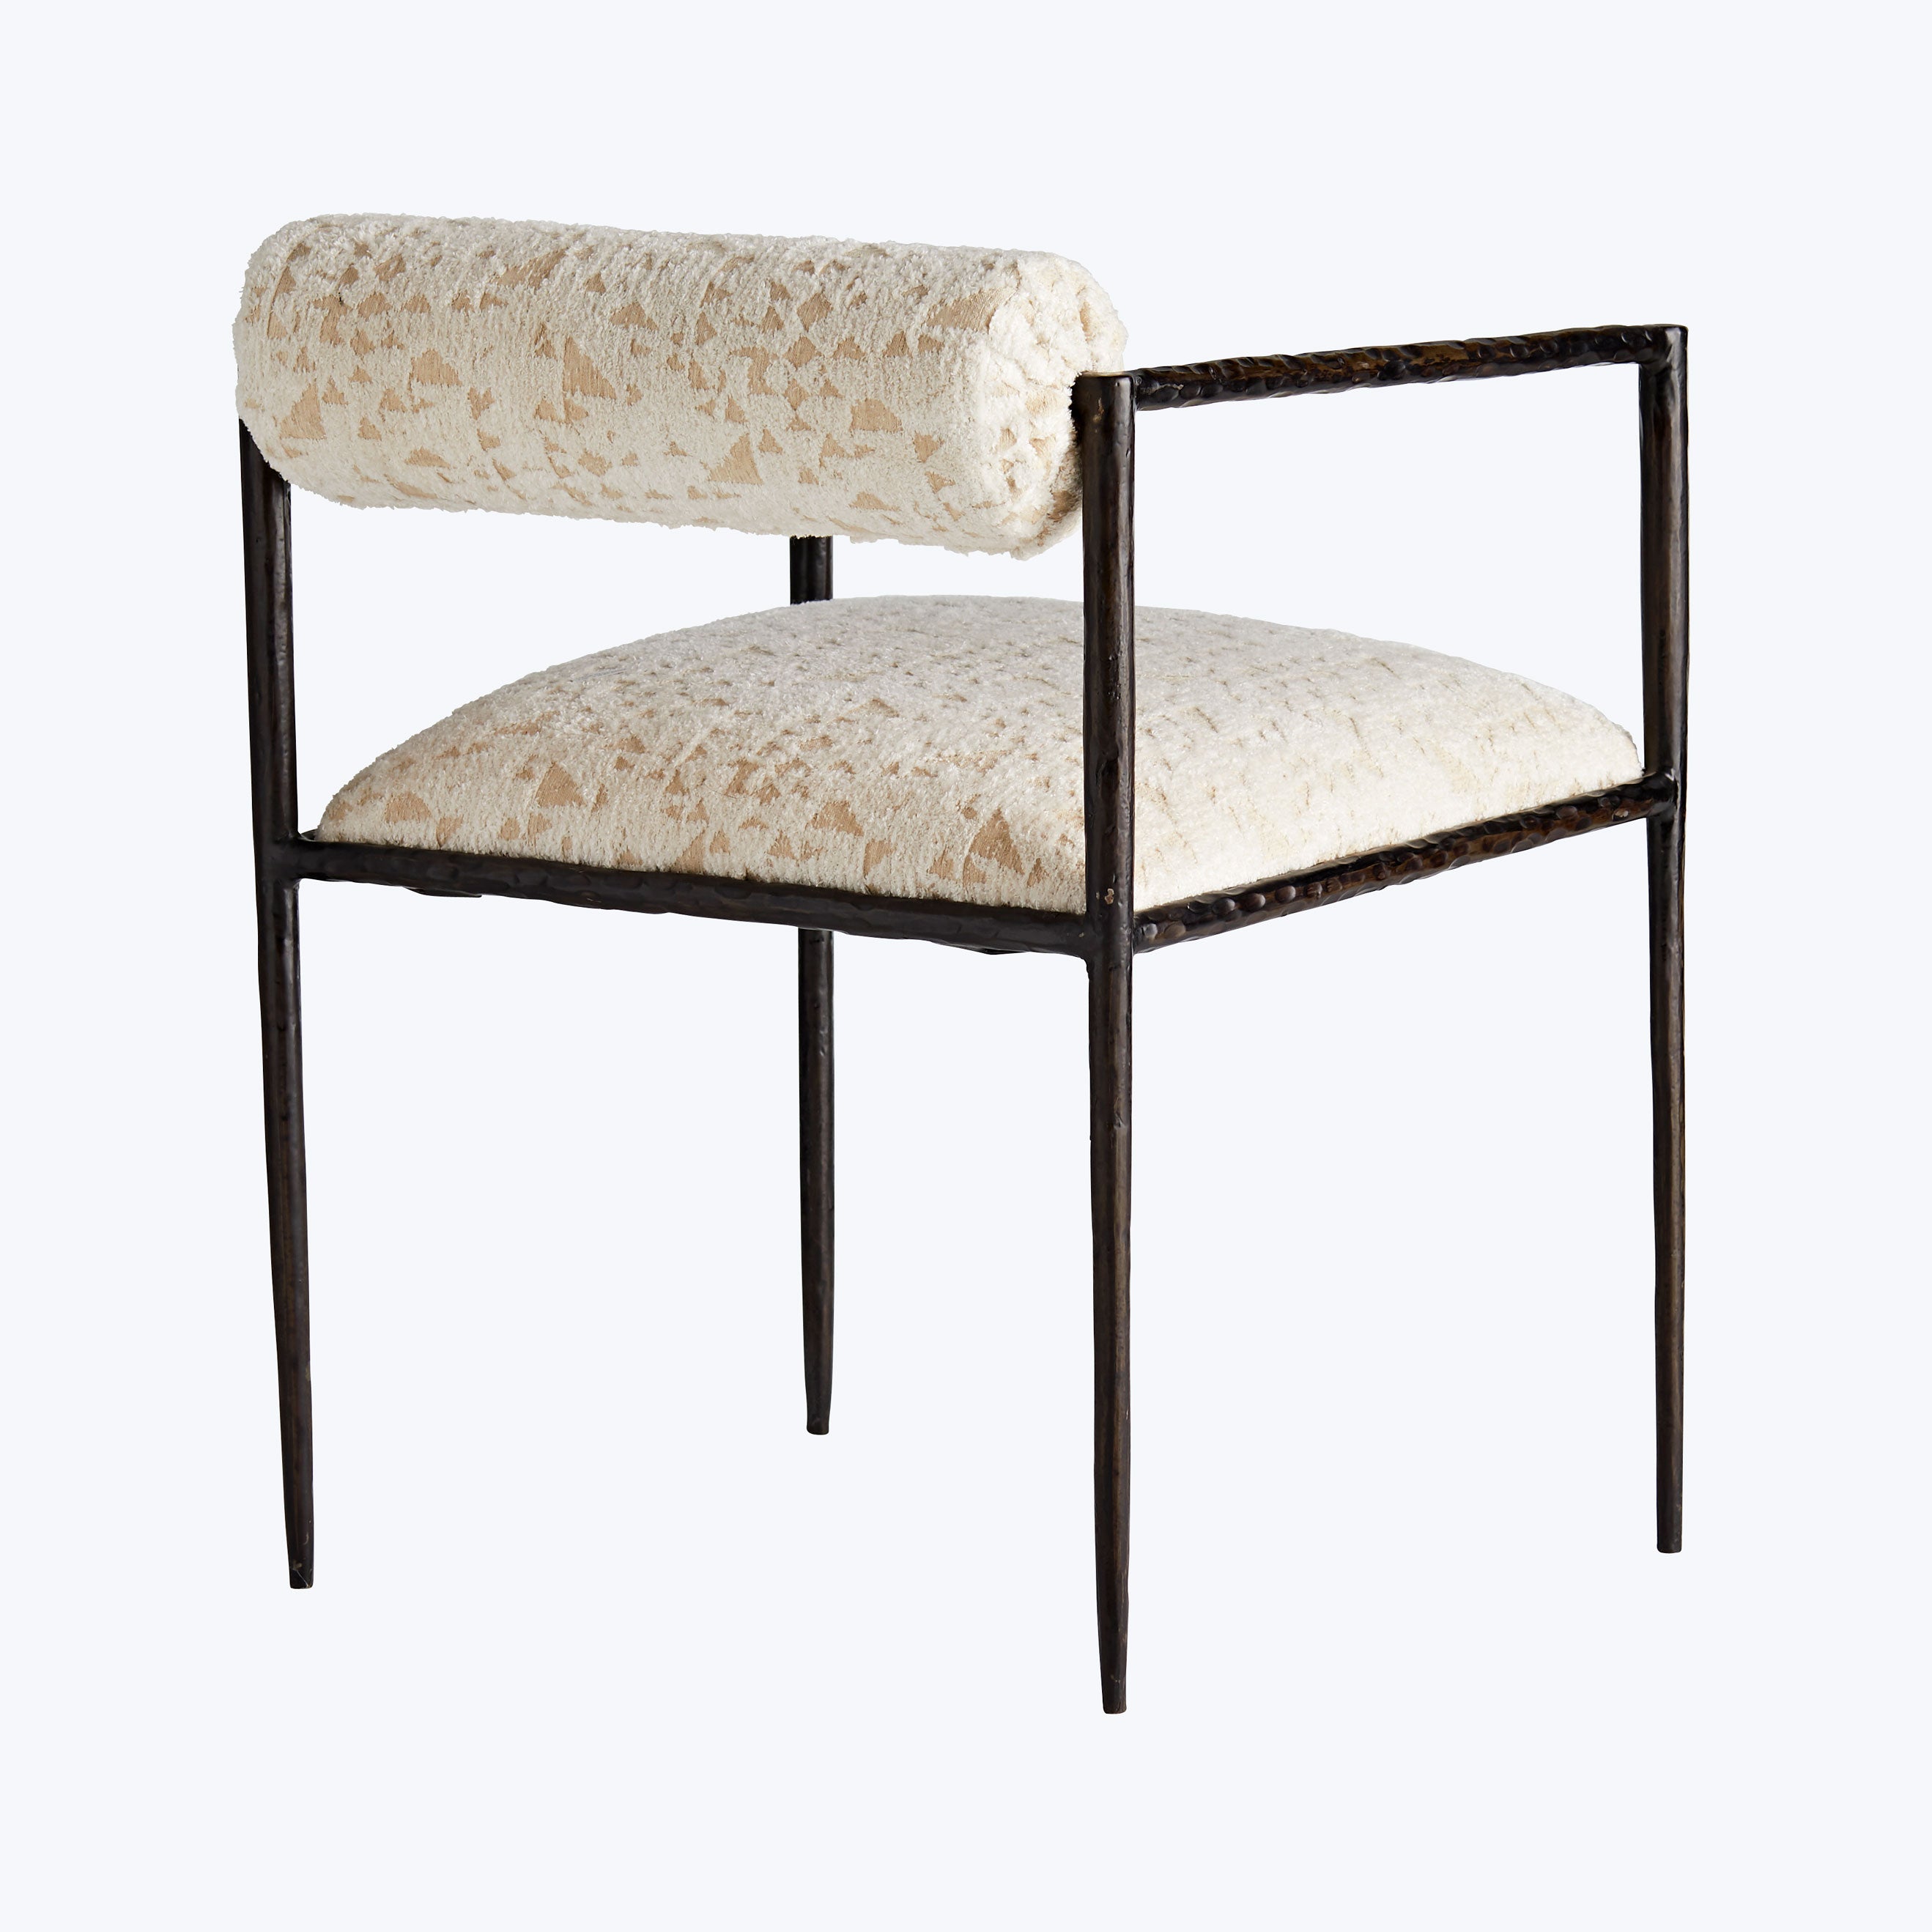 Modern chair with metal frame, sleek upholstery, and geometric pattern.